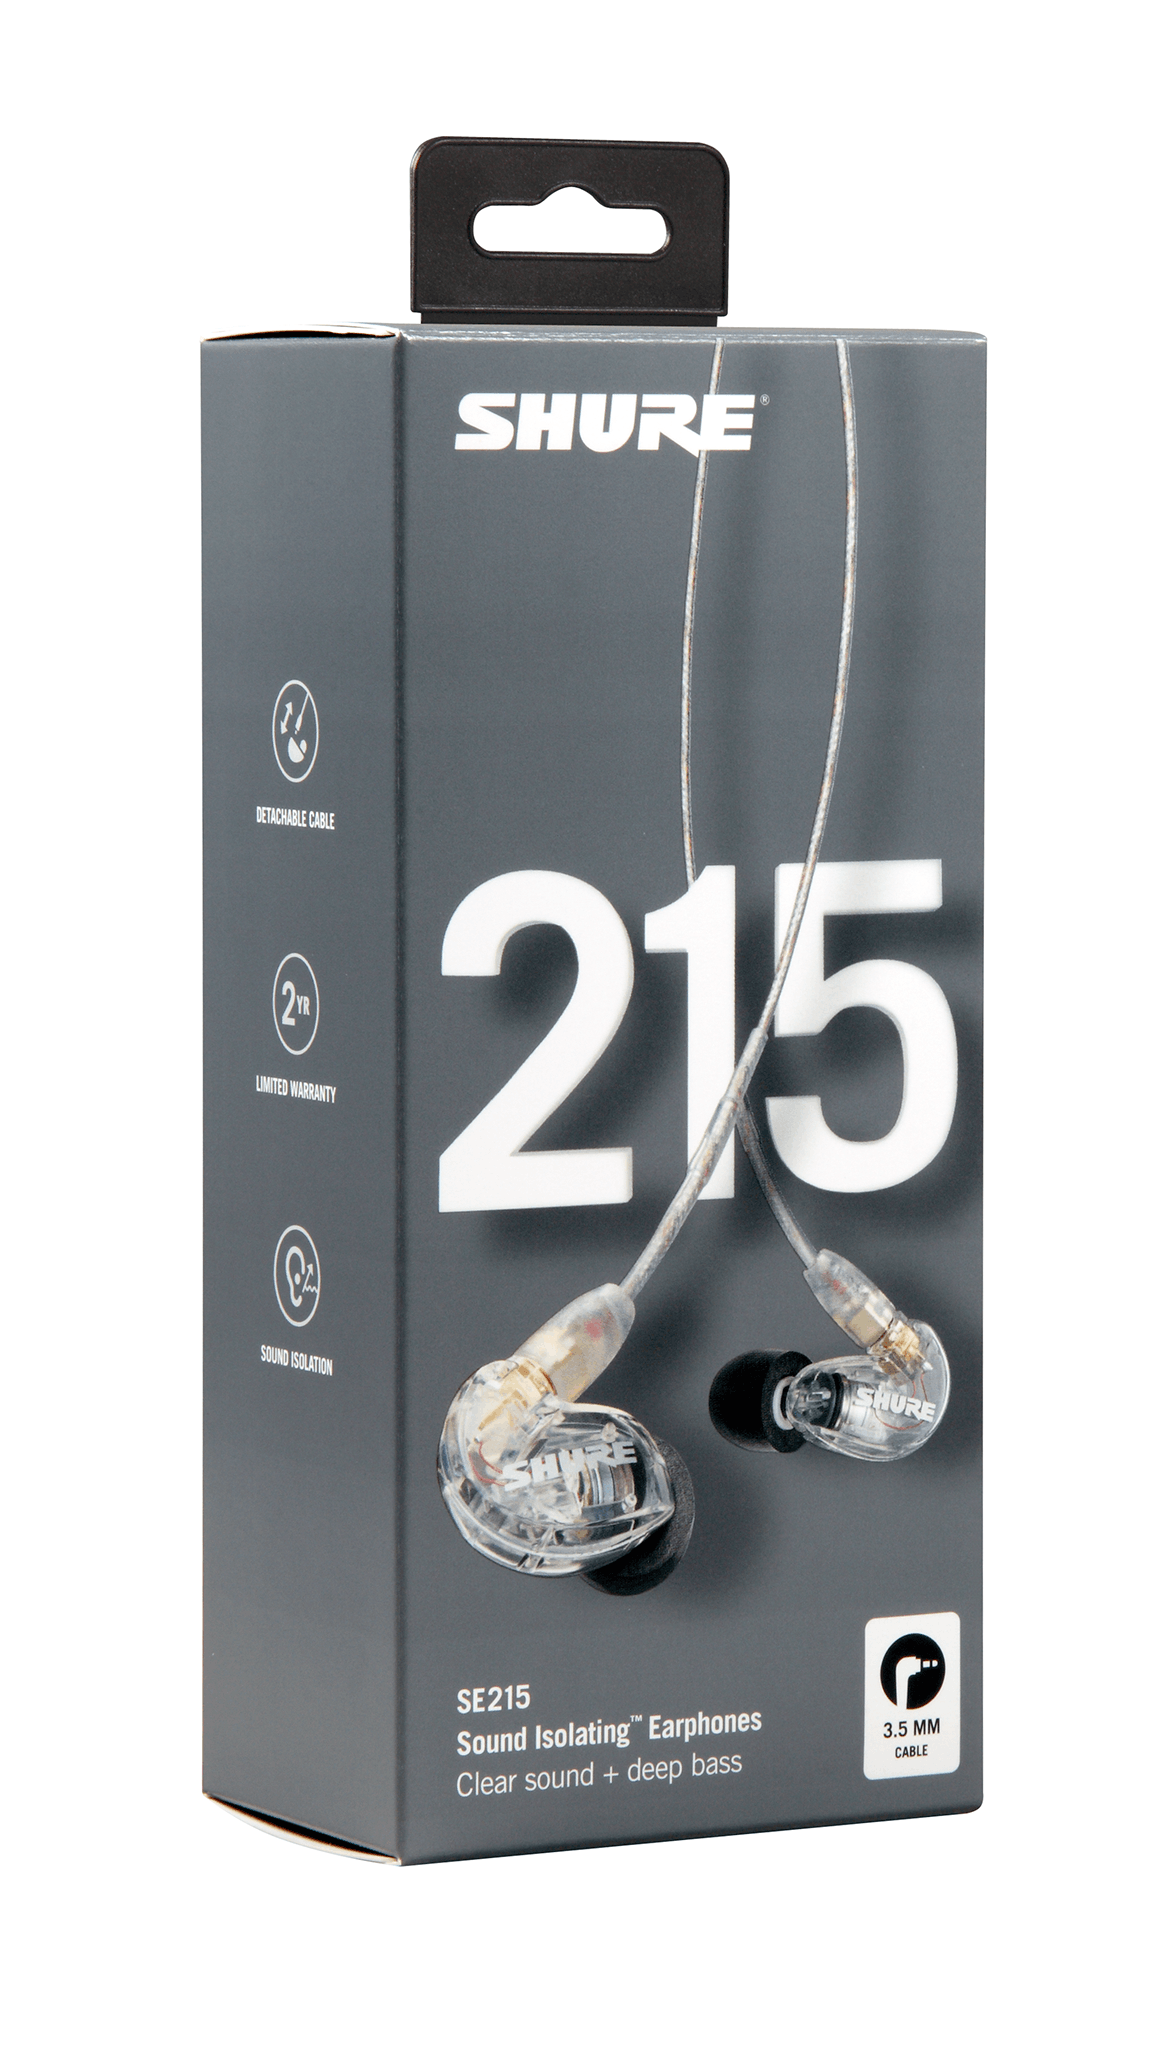 Shure SE215-CL Sound-Isolating In-Ear Stereo Earphones (Clear)